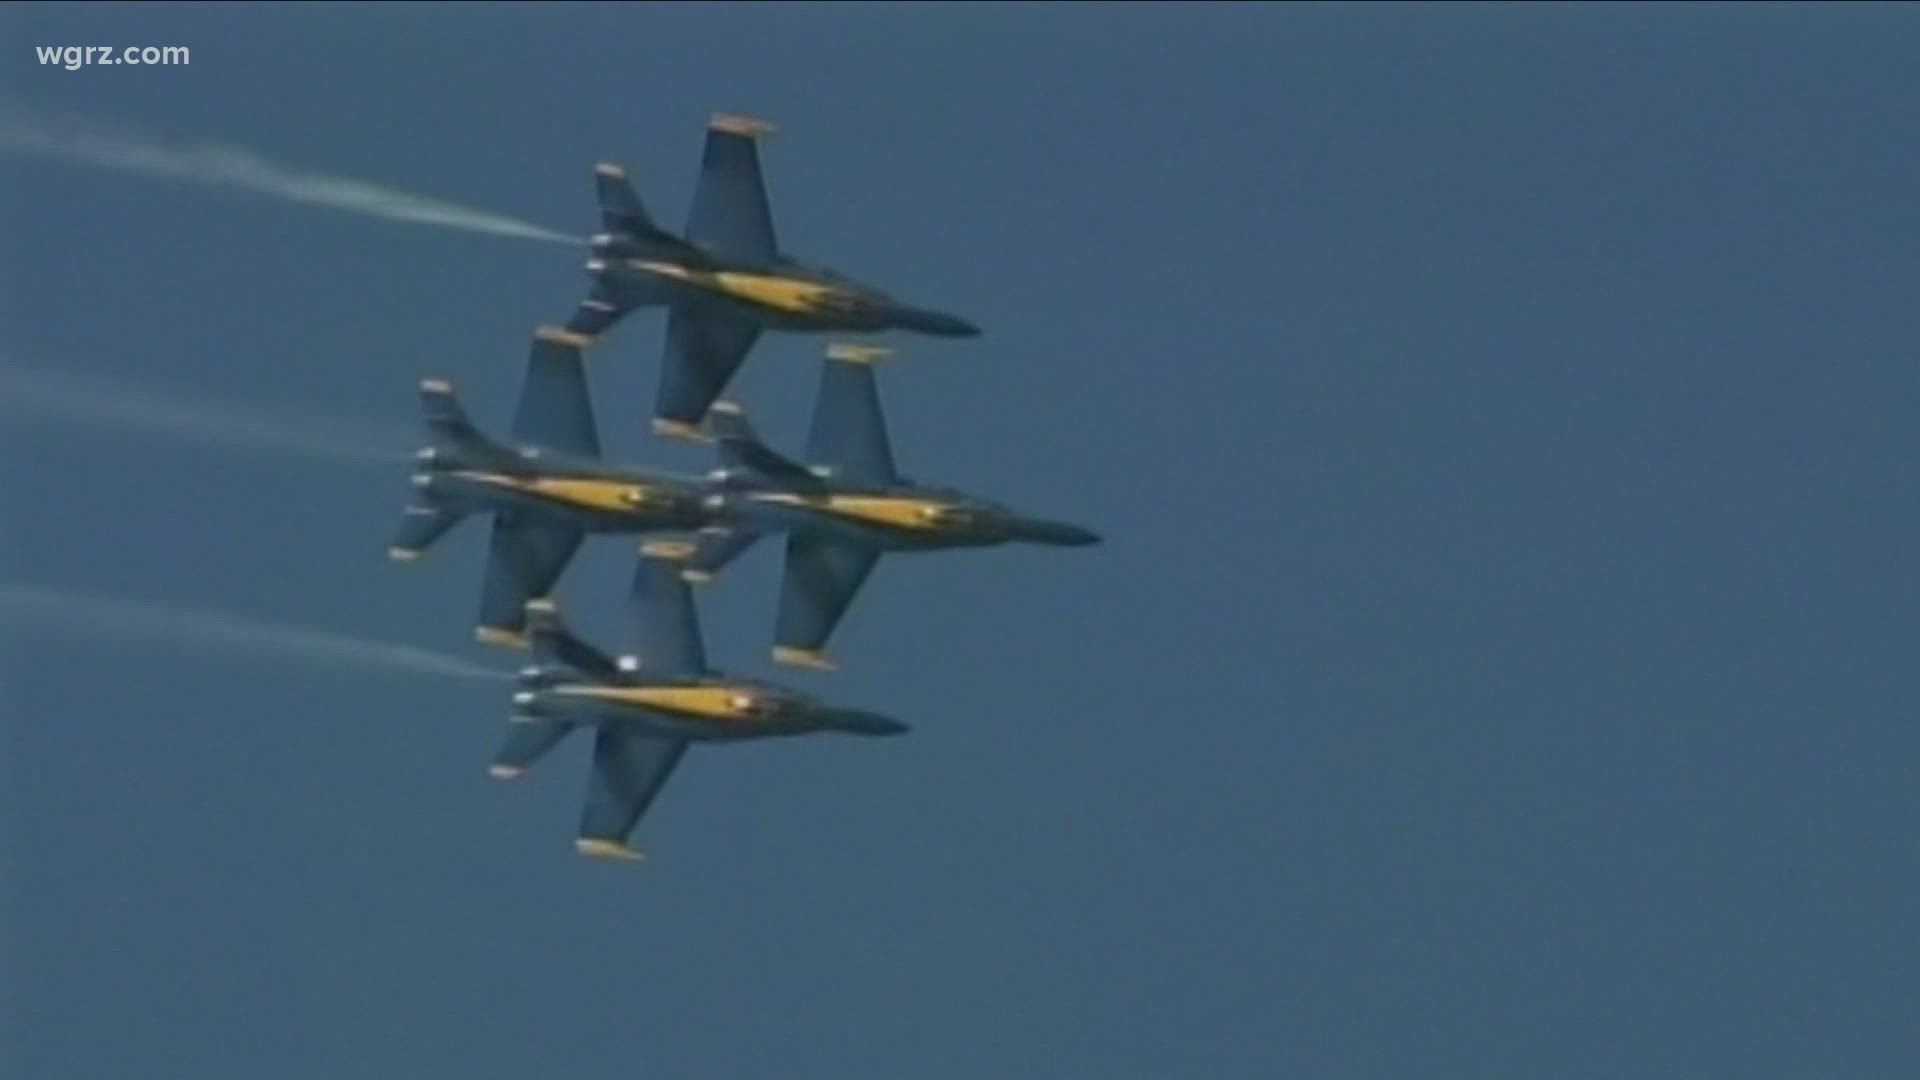 Many are looking forward to the airshow at the outer harbor, but the event may also take a big bite out of the profits of some local businessmen.